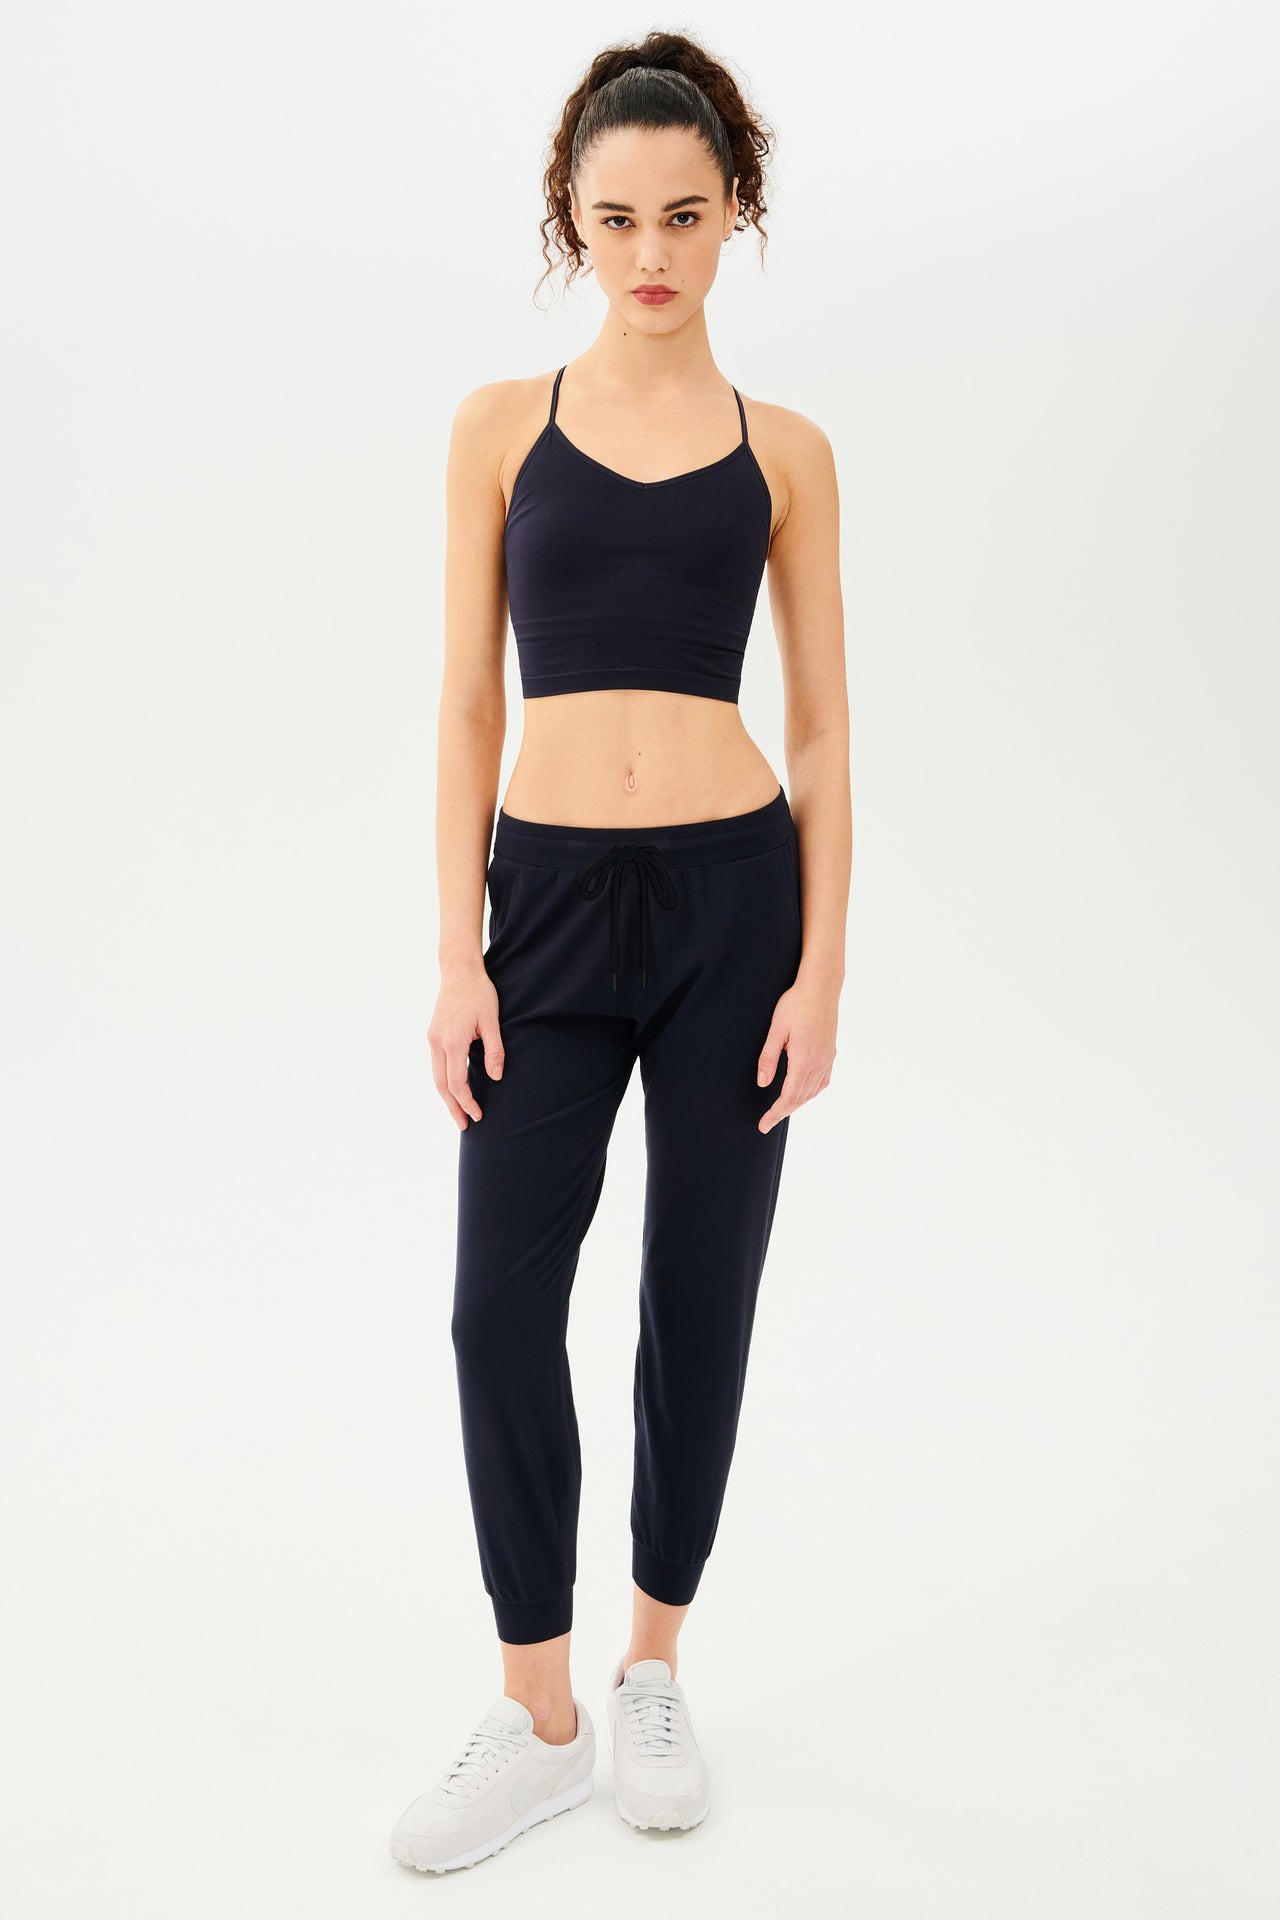 Full front view of girl wearing dark blue sweatpants with black tie around waistband and a dark blue sports bra with white shoes 